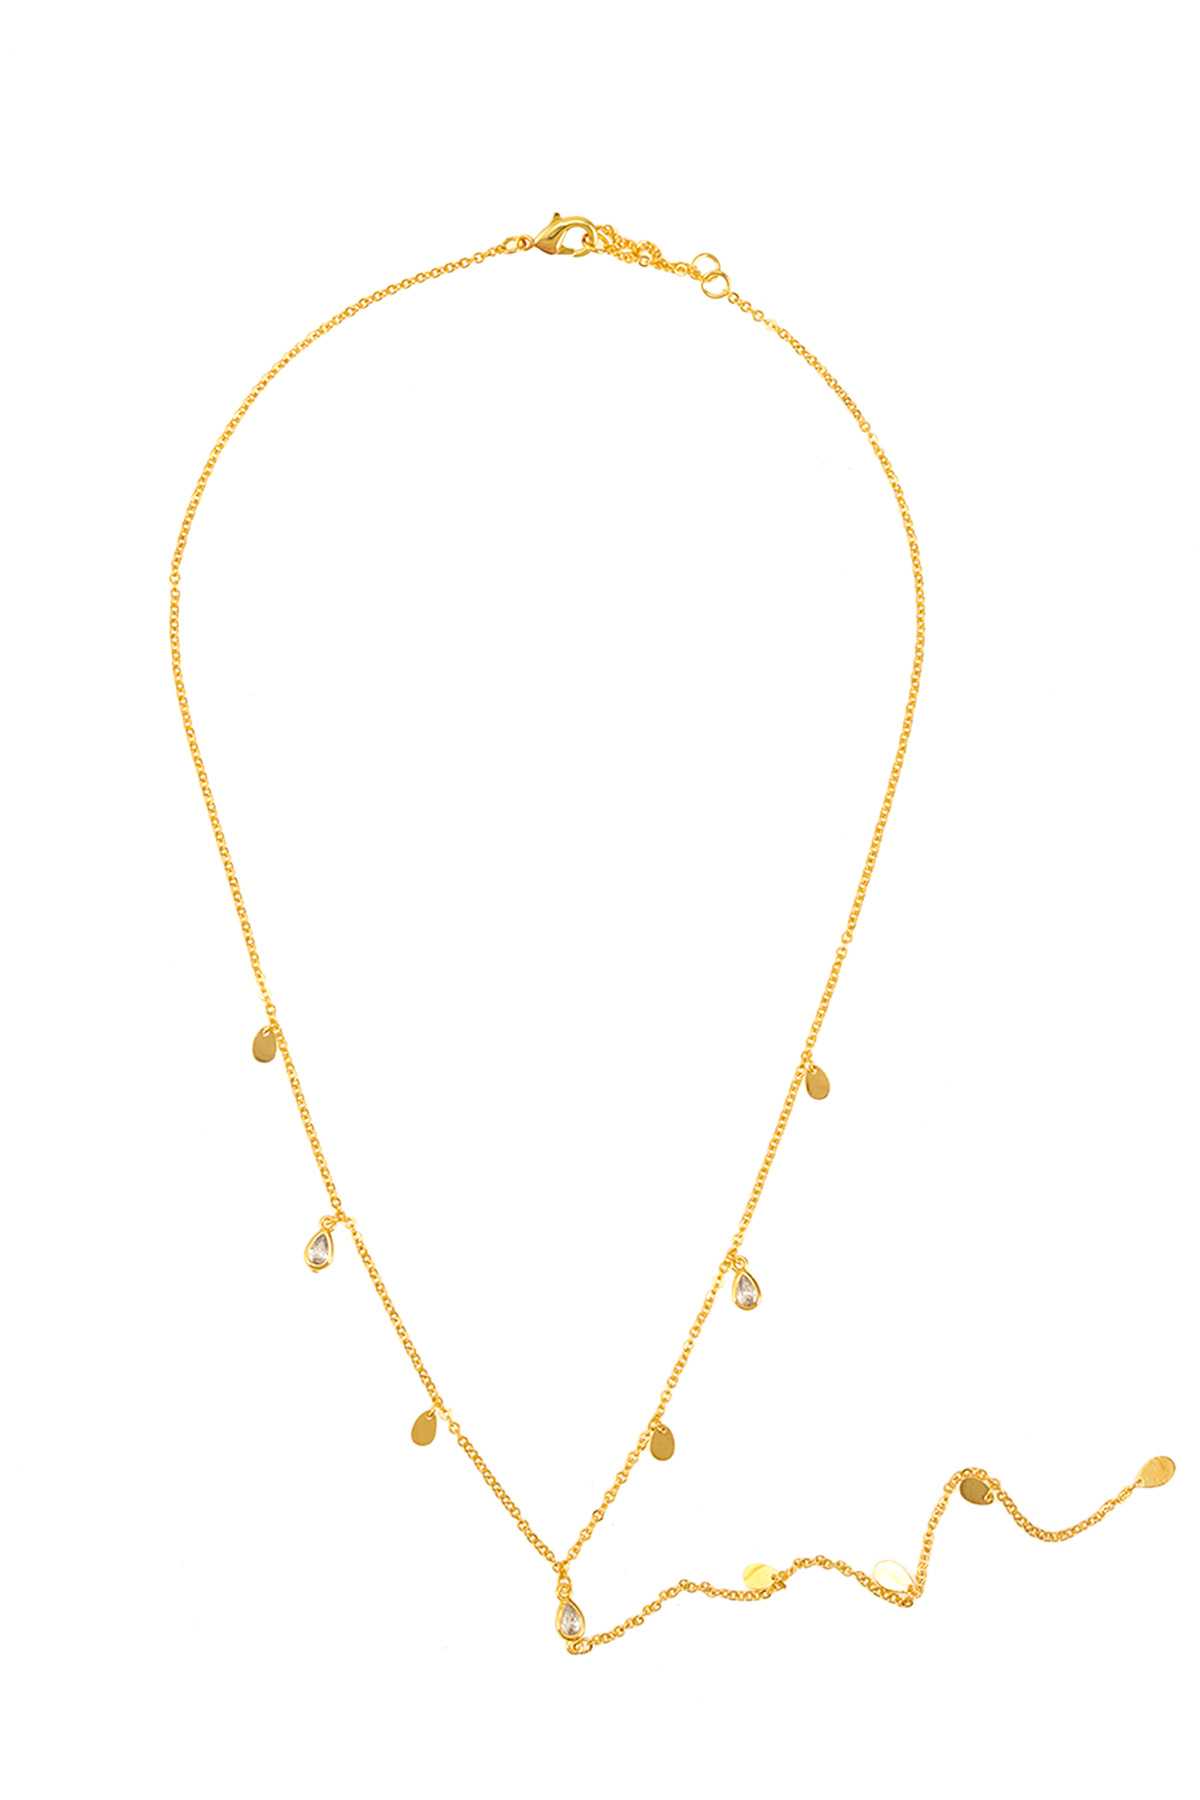 GOLD DIPPED SMALL TEAR CUBIC CHARM LARIAT NECKLACE